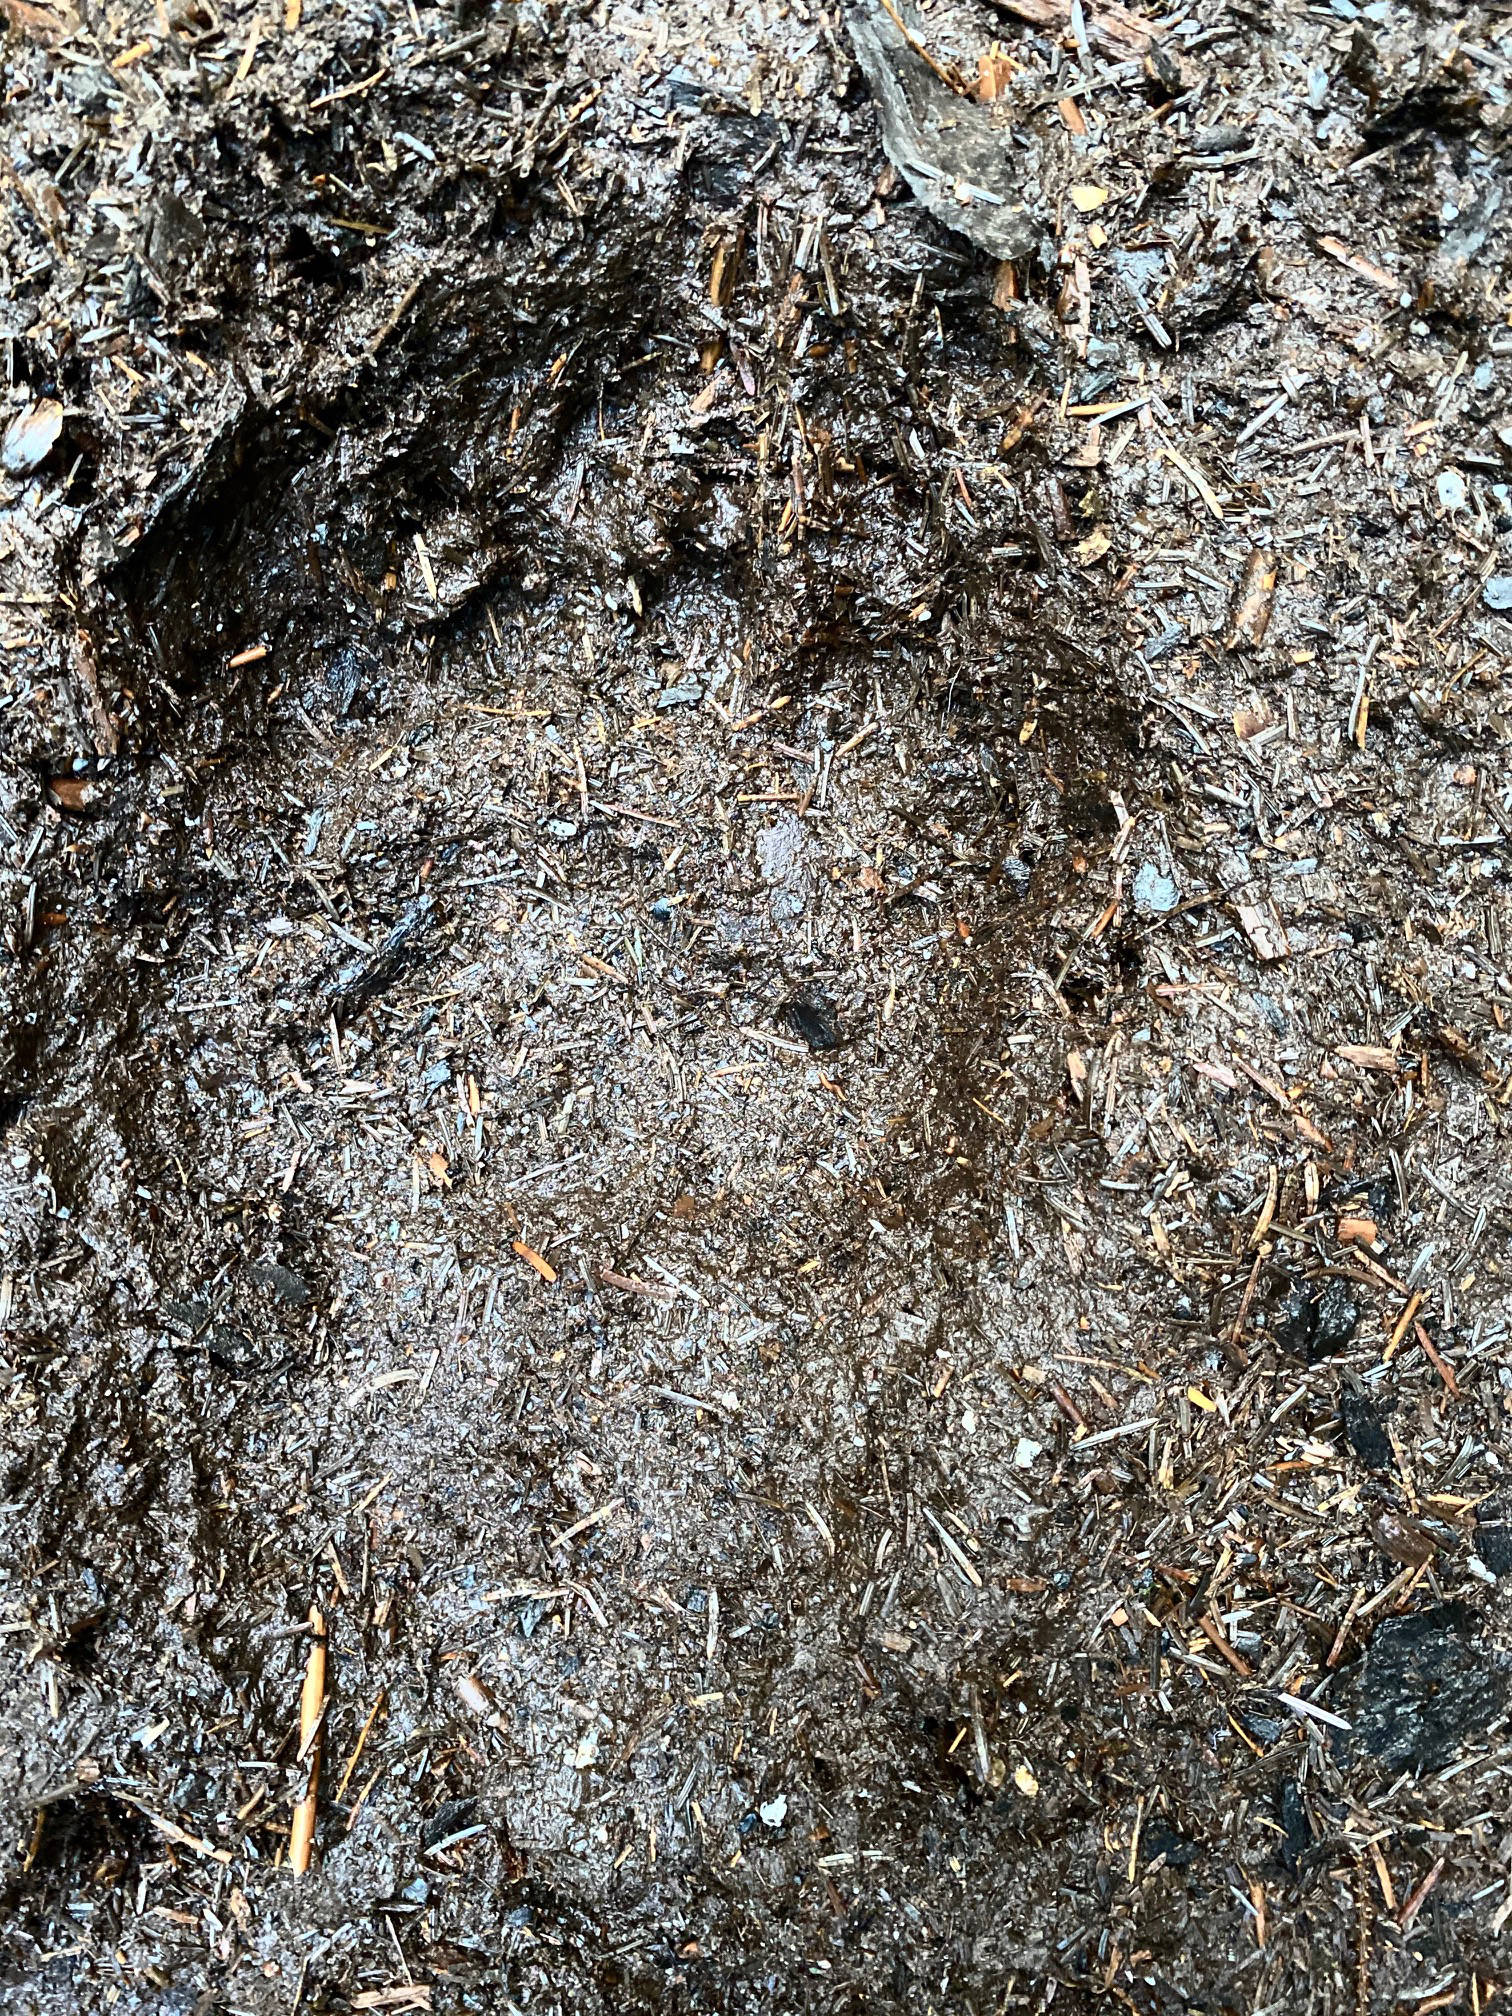 A large bear print is seen in the mud along Windfall Lake trail on Sept. 4, 2020. (Courtesy Photo / Denise Carroll)